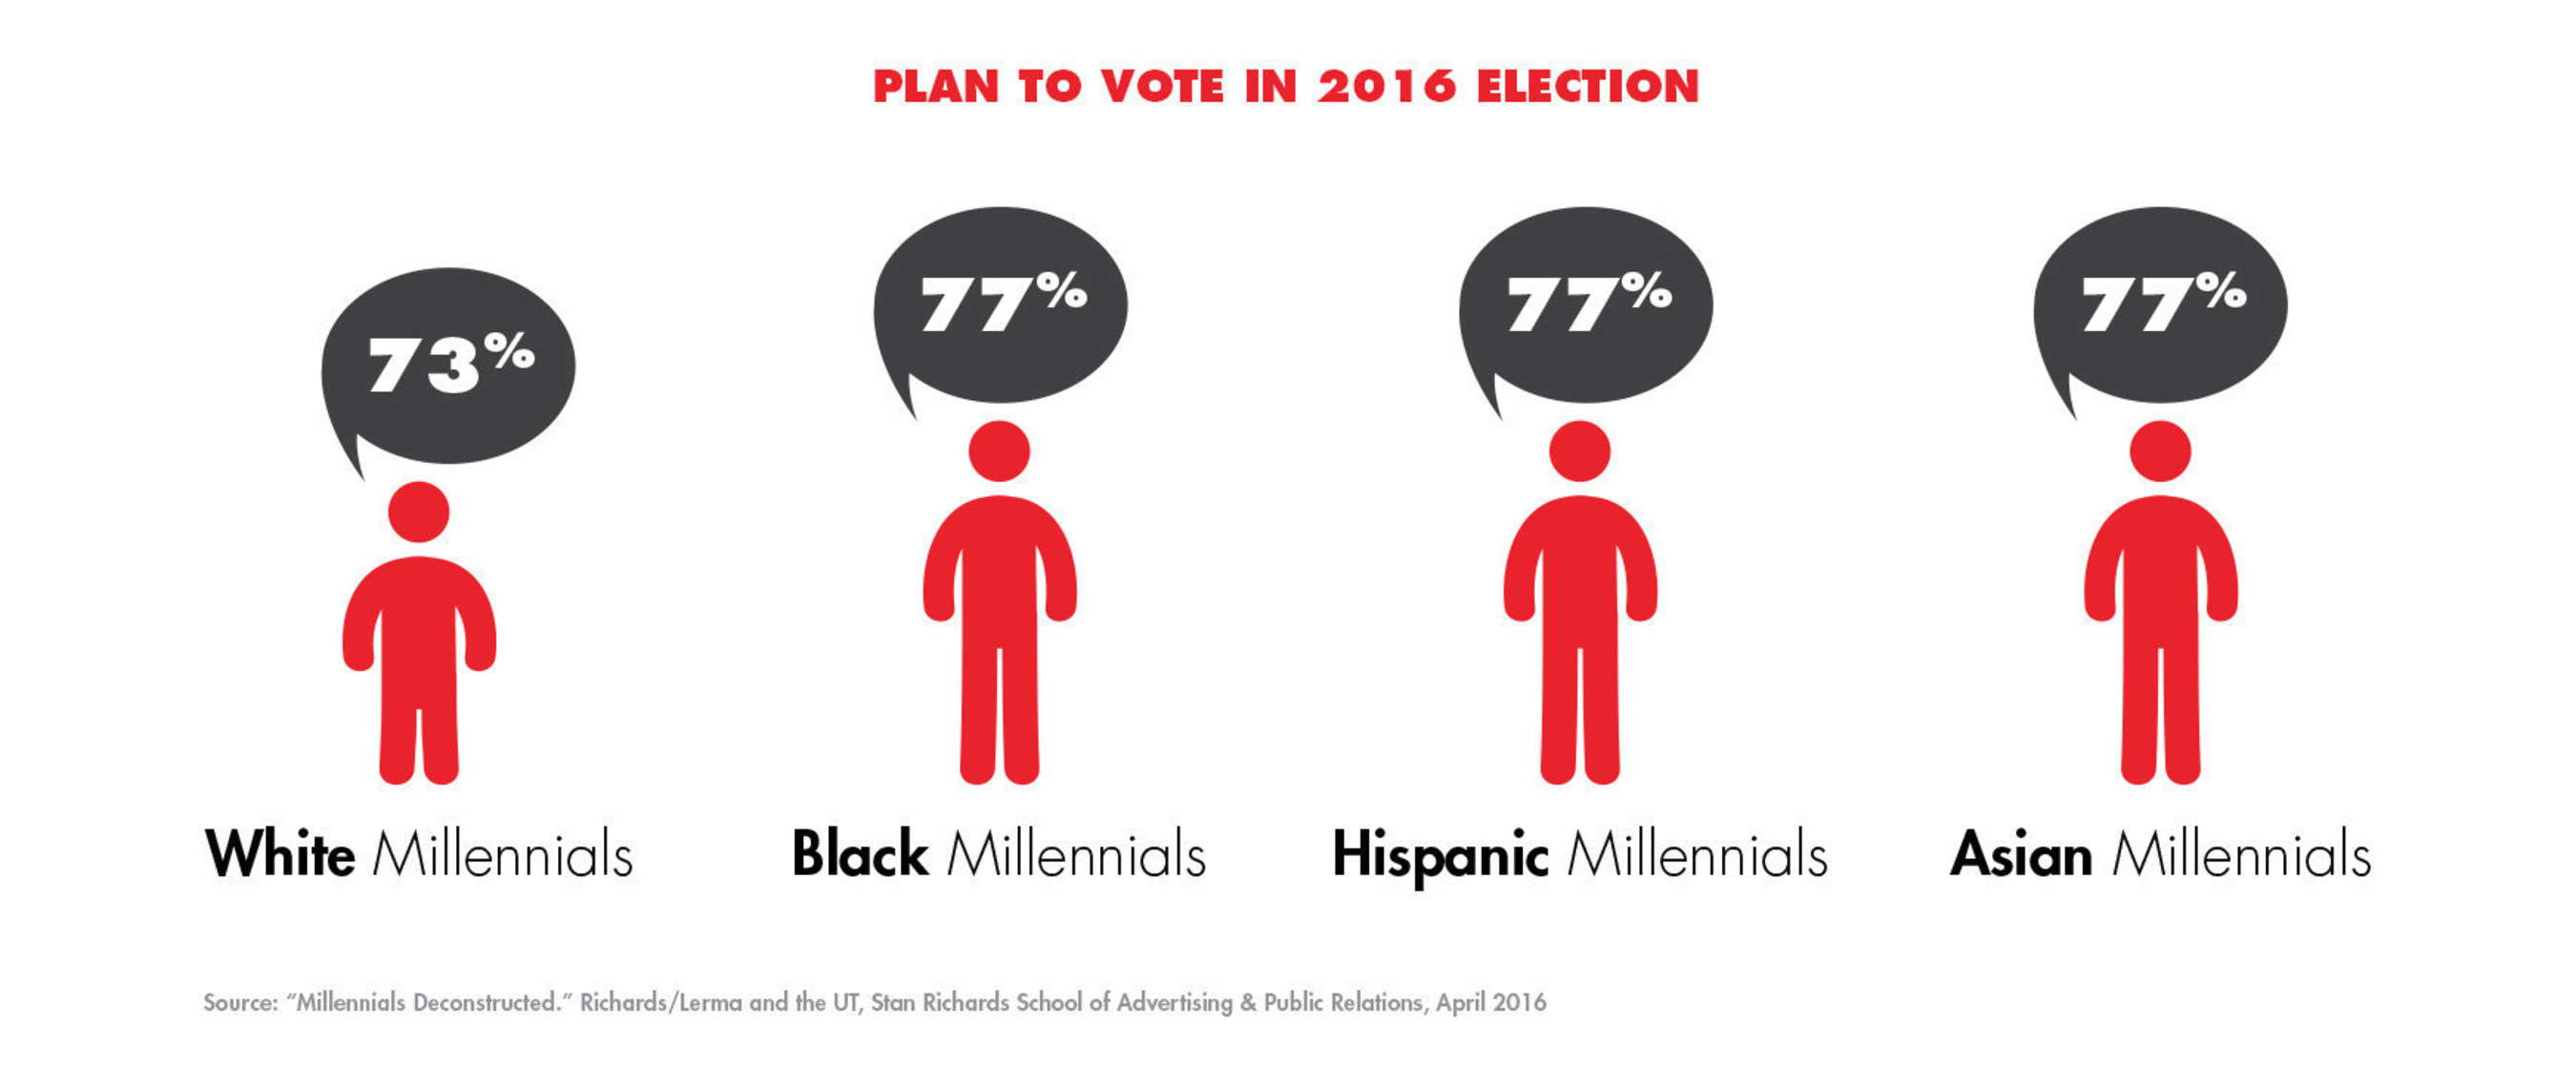 Plan to vote in the 2016 election?